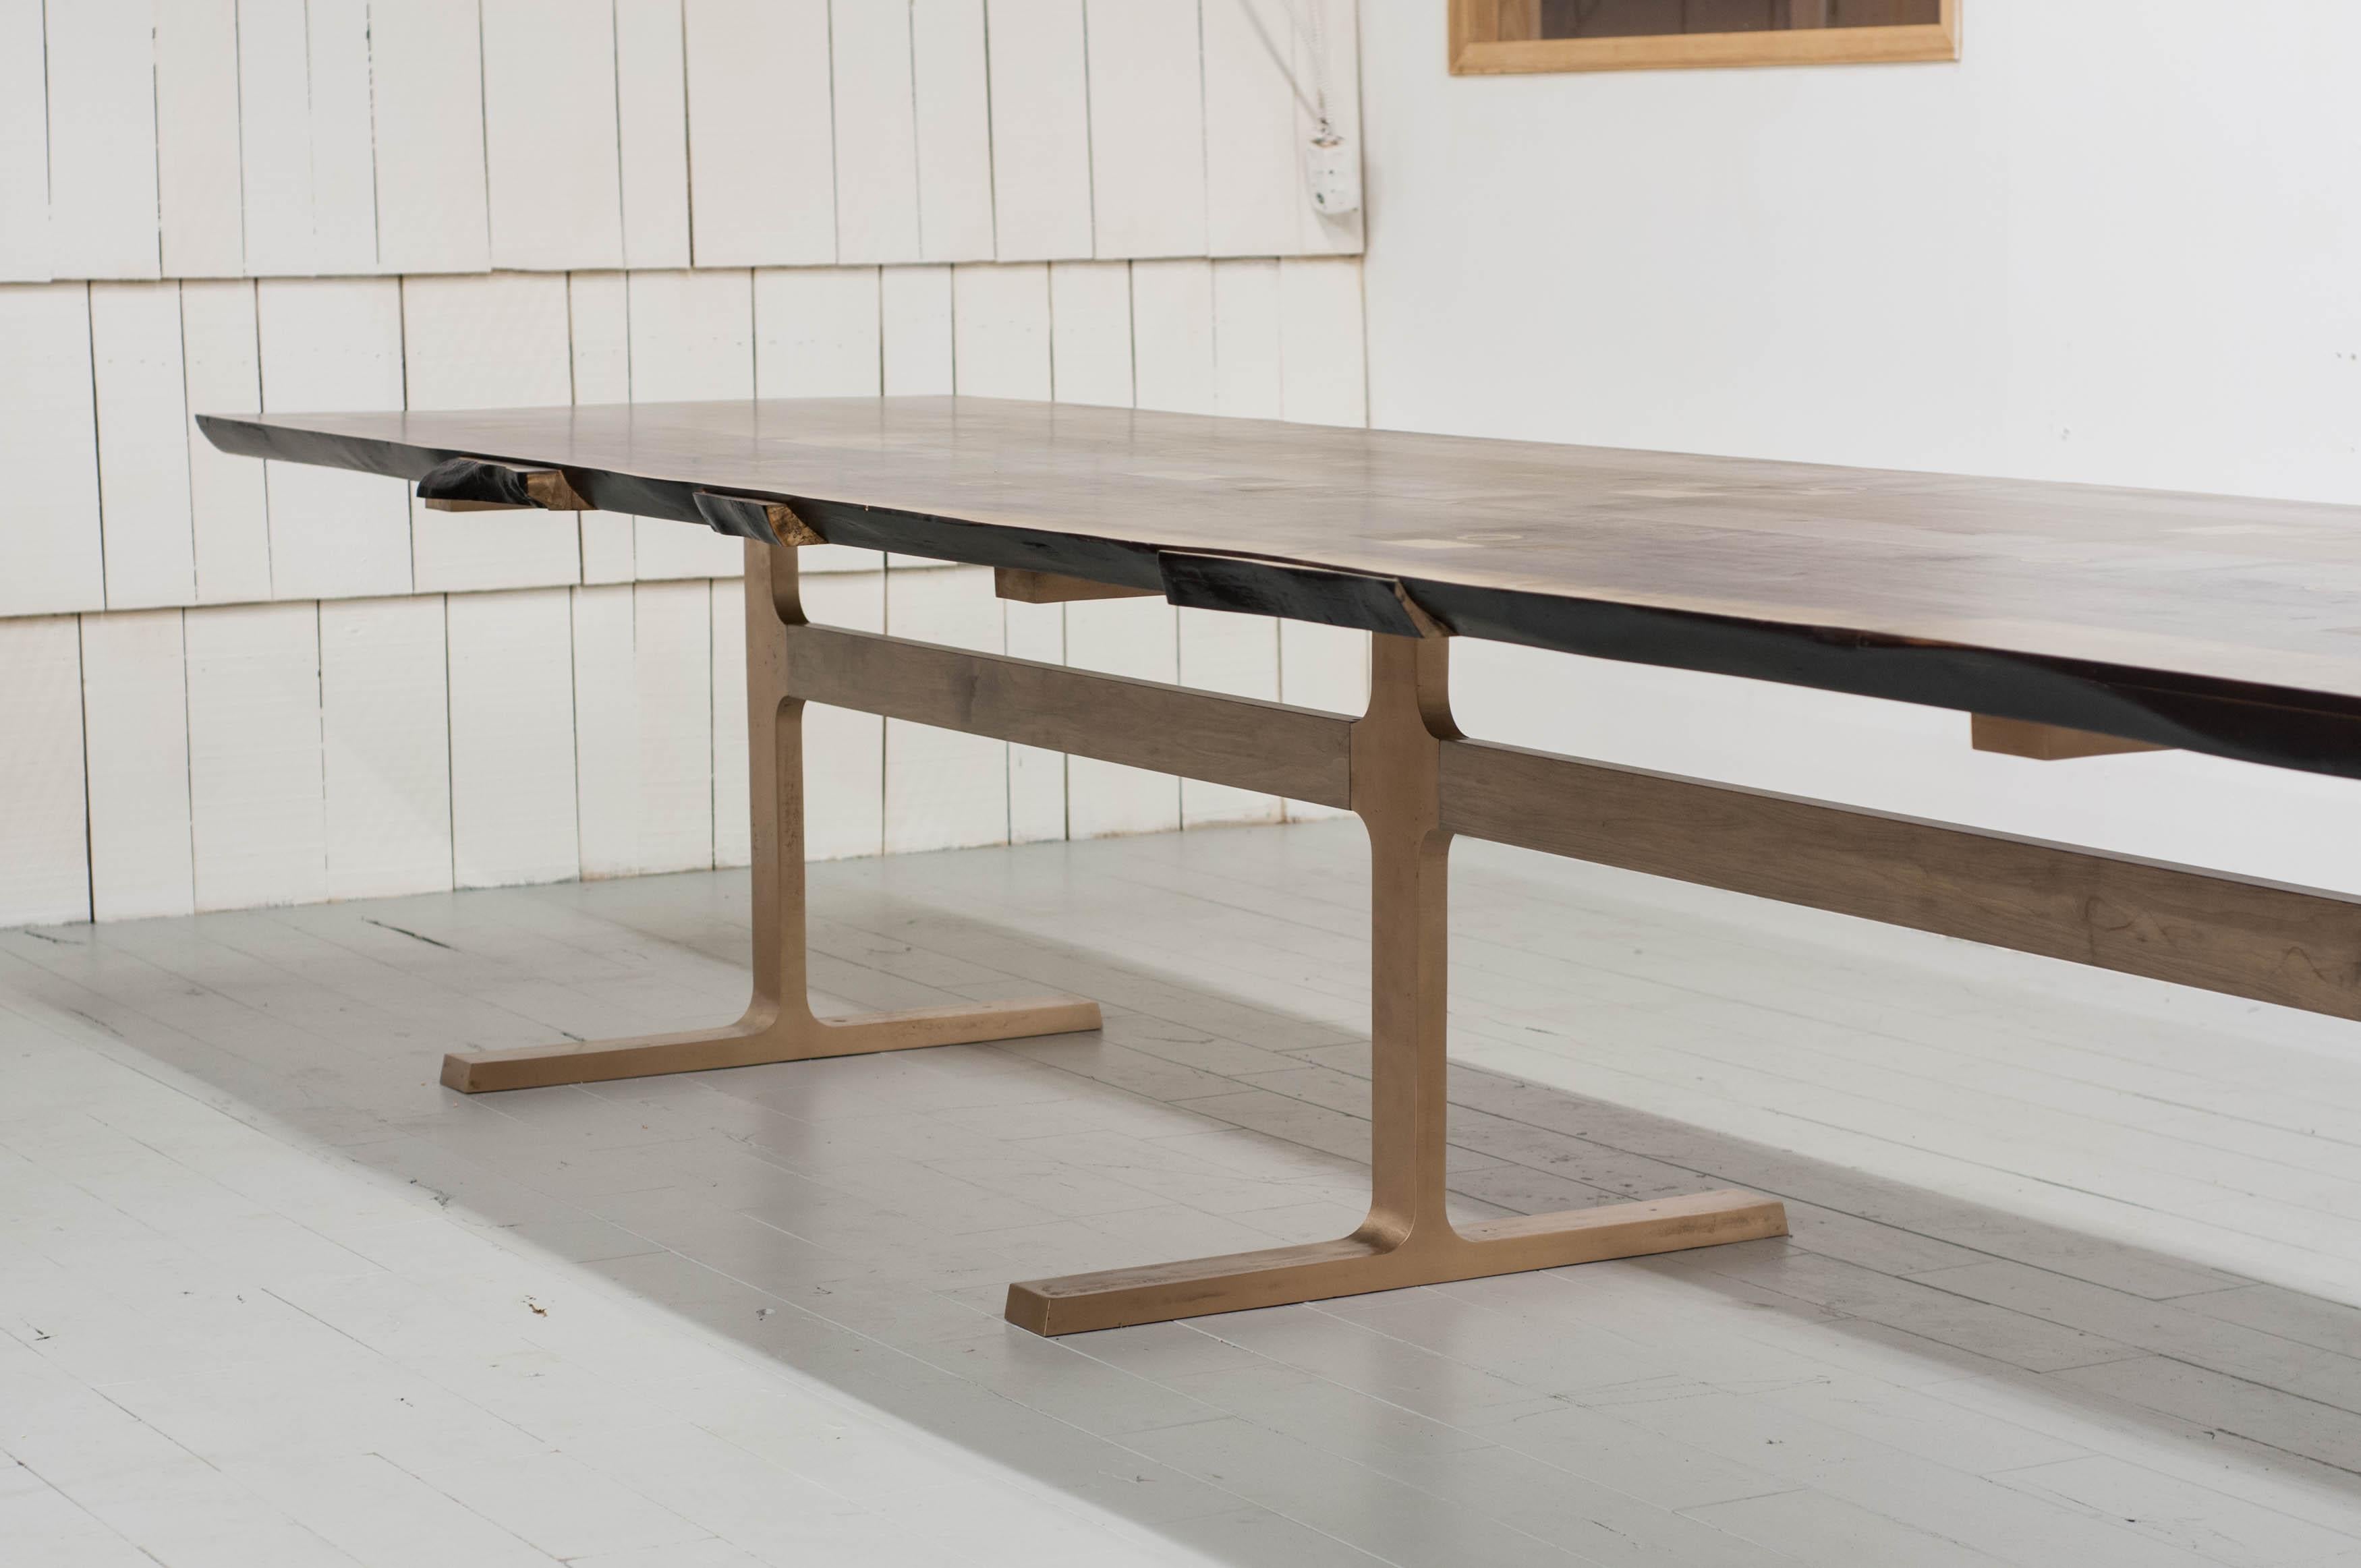 Award winning design from the Vancouver based studio Jeff Martin Joinery.

Distilled to its purest elements, the bronze Shaker table utilizes cast joinery components in the bronze legs and inlayed bronze rings in the wood top.

Available